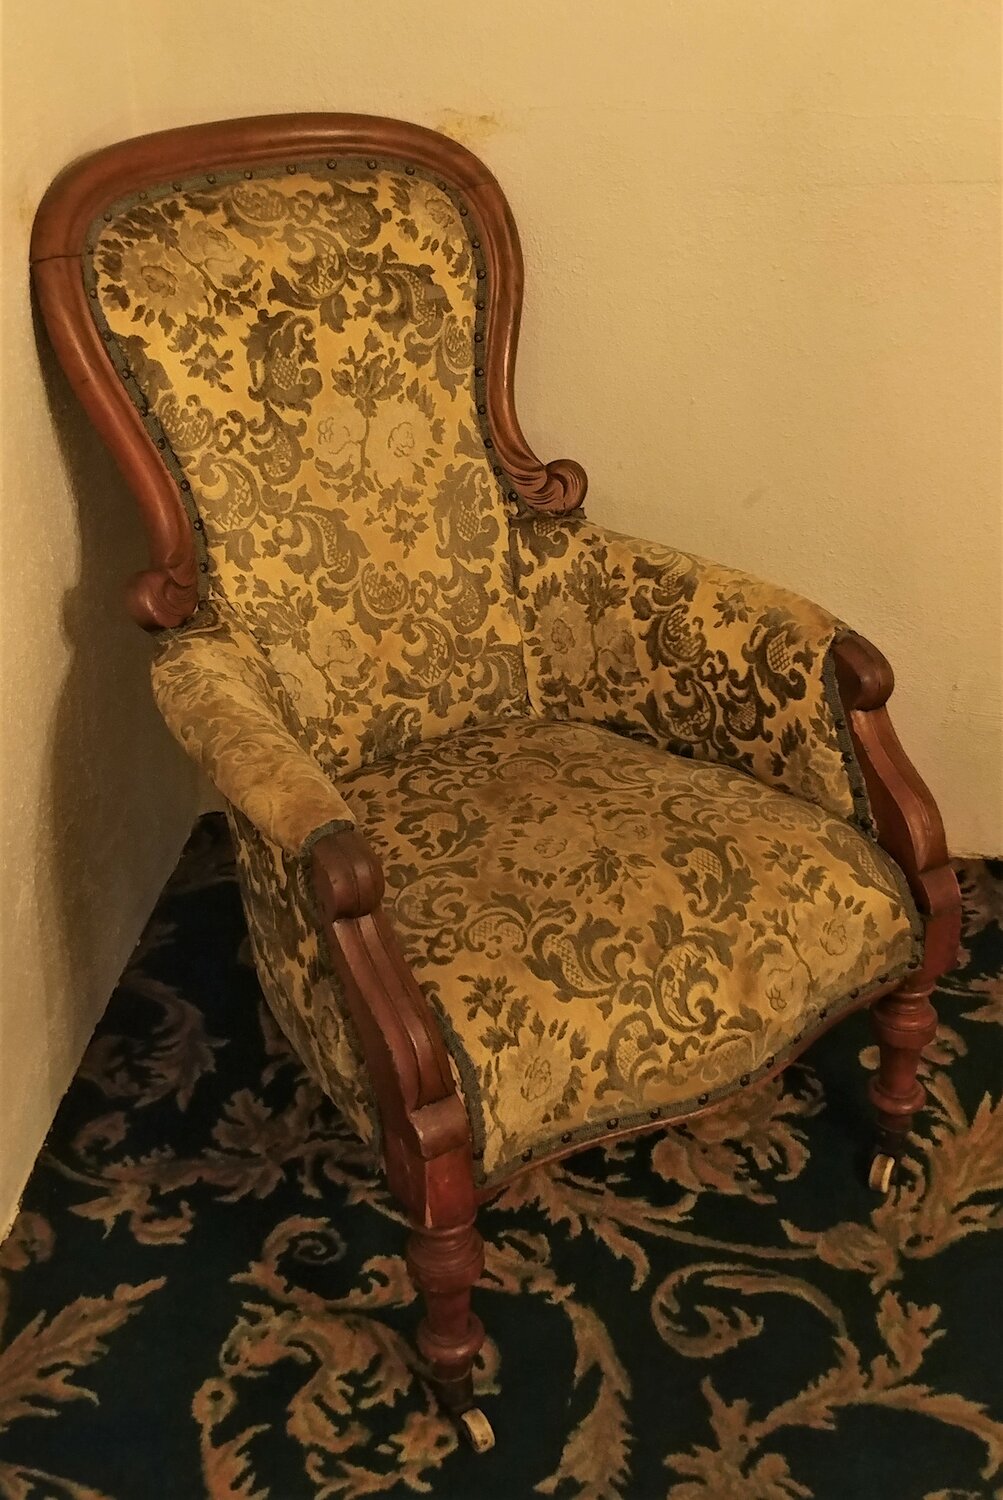 The ghost chair in Double Eagle’s Carlotta Room